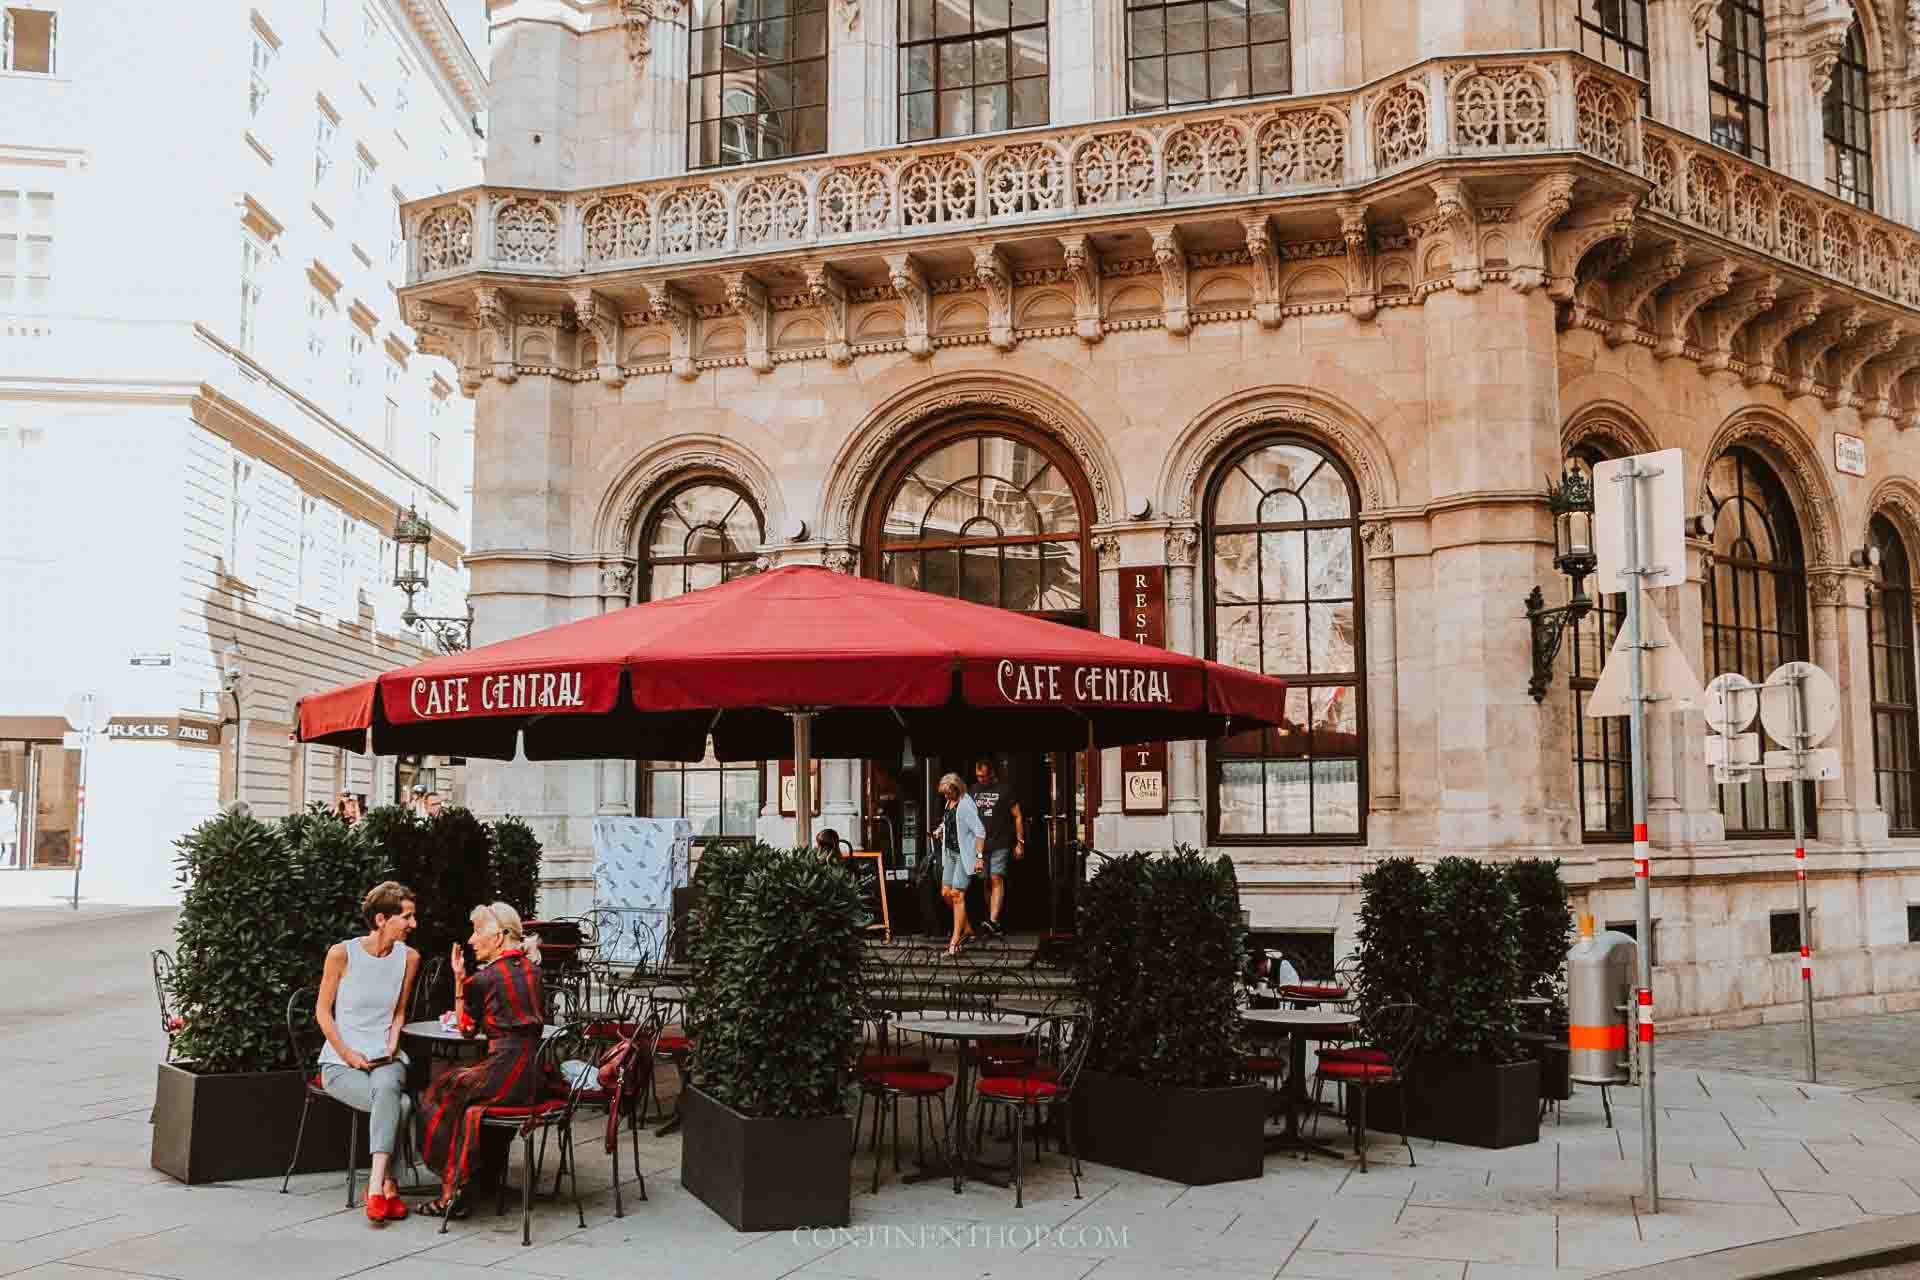 People sitting outside cafe Central in Vienna on a 3 month itinerary Europe